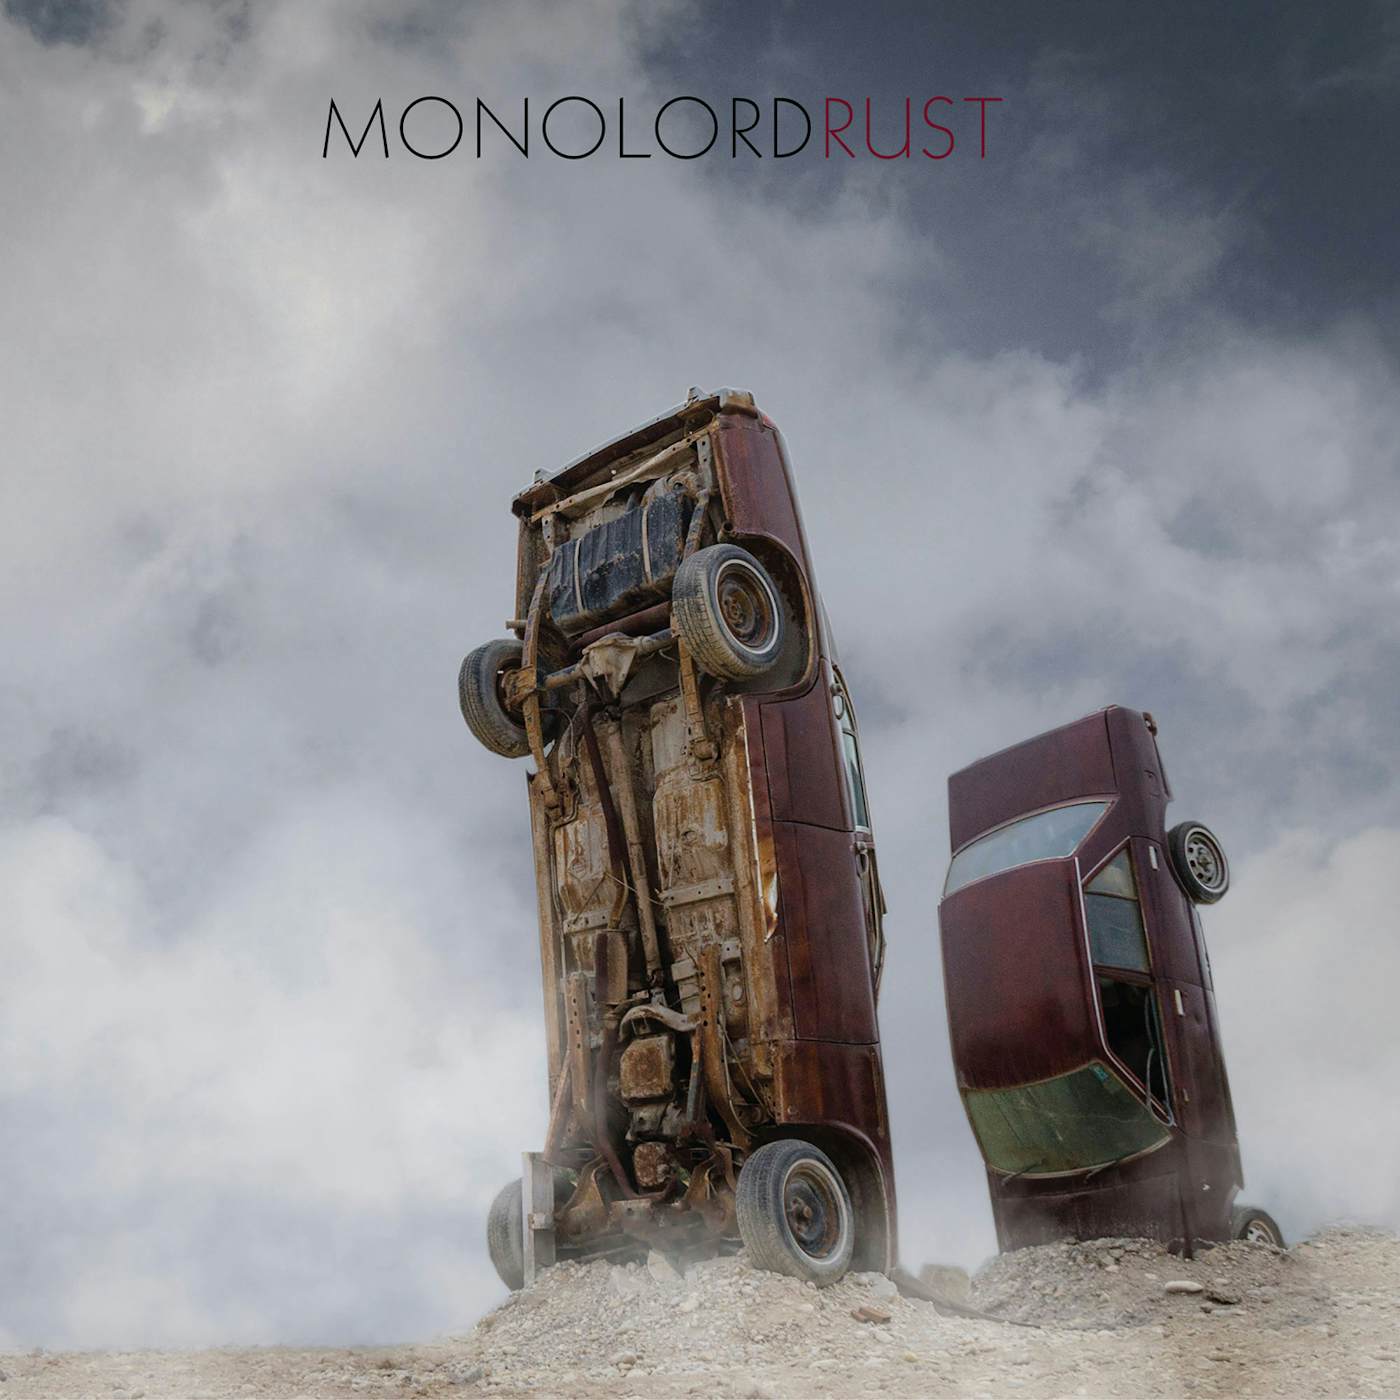 Monolord RUST CD